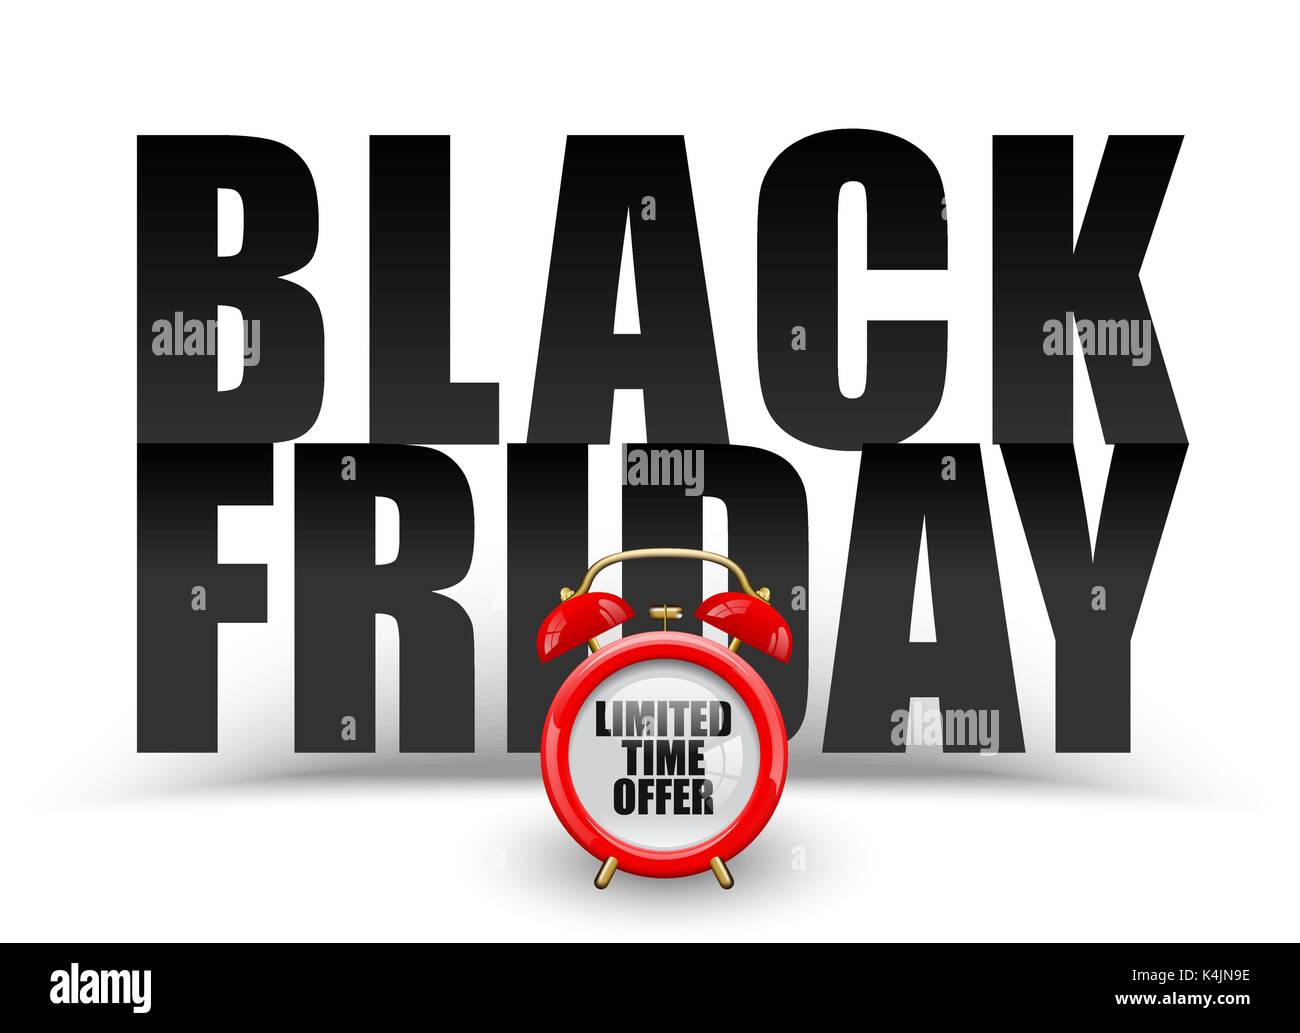 Black friday black text on white background. Vector red alarm clock with limited time offer. Banner for holiday sale promotion. Stock Vector